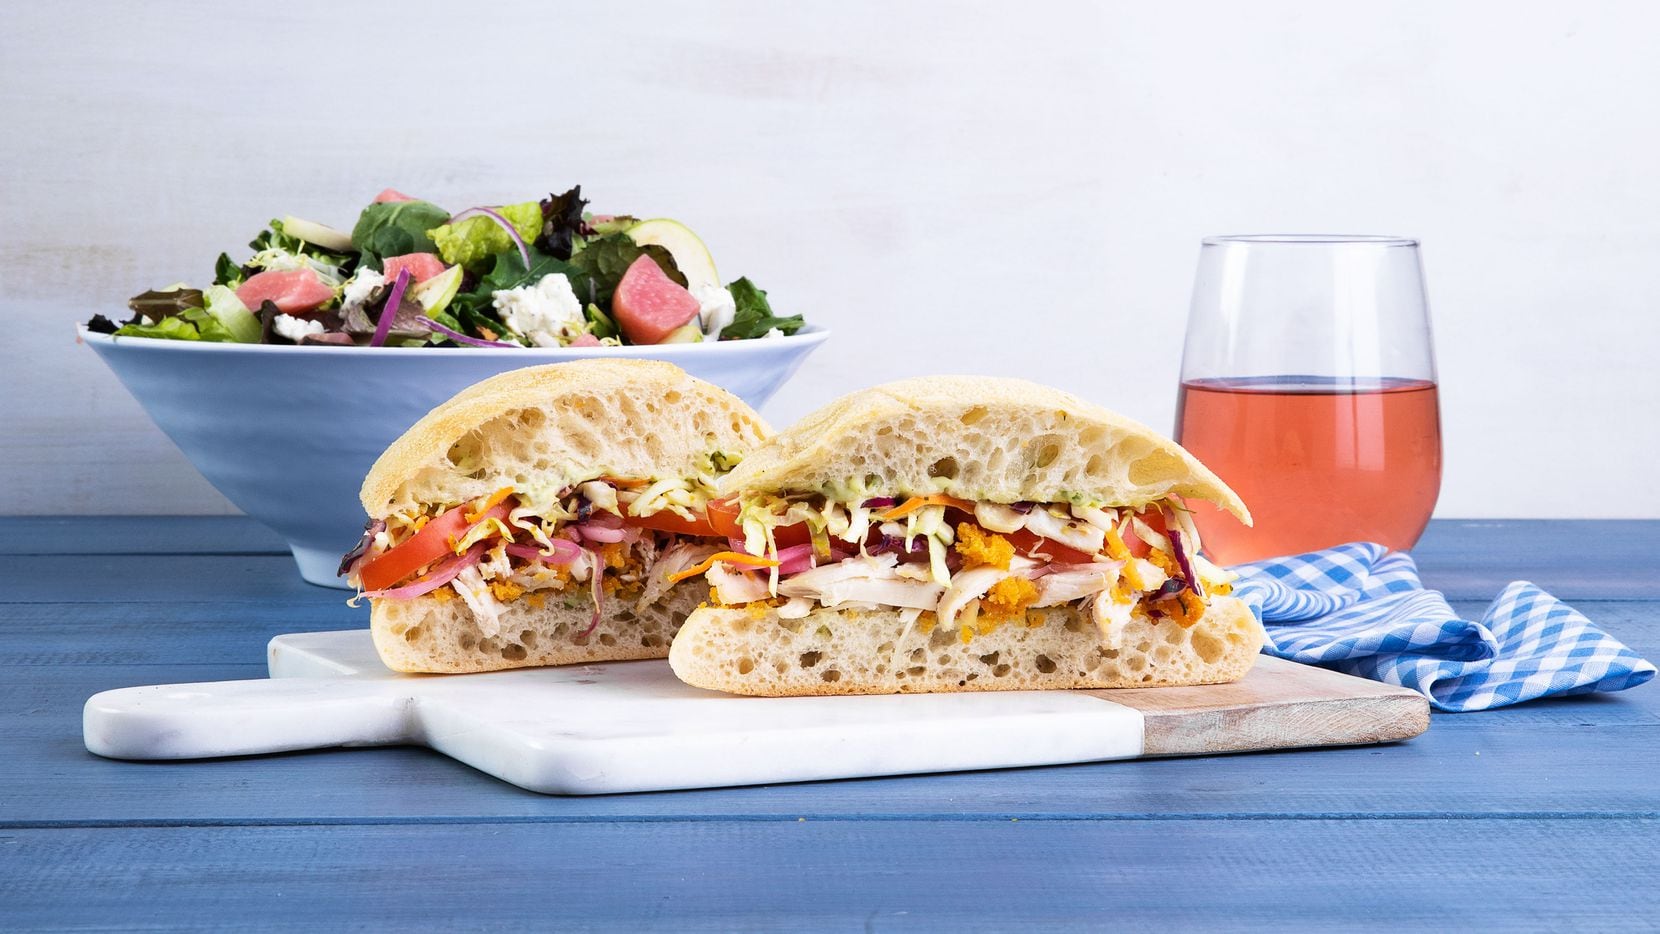 Mendocino Farms' 'not so fried' chicken sandwich is available in half, with a side, for...